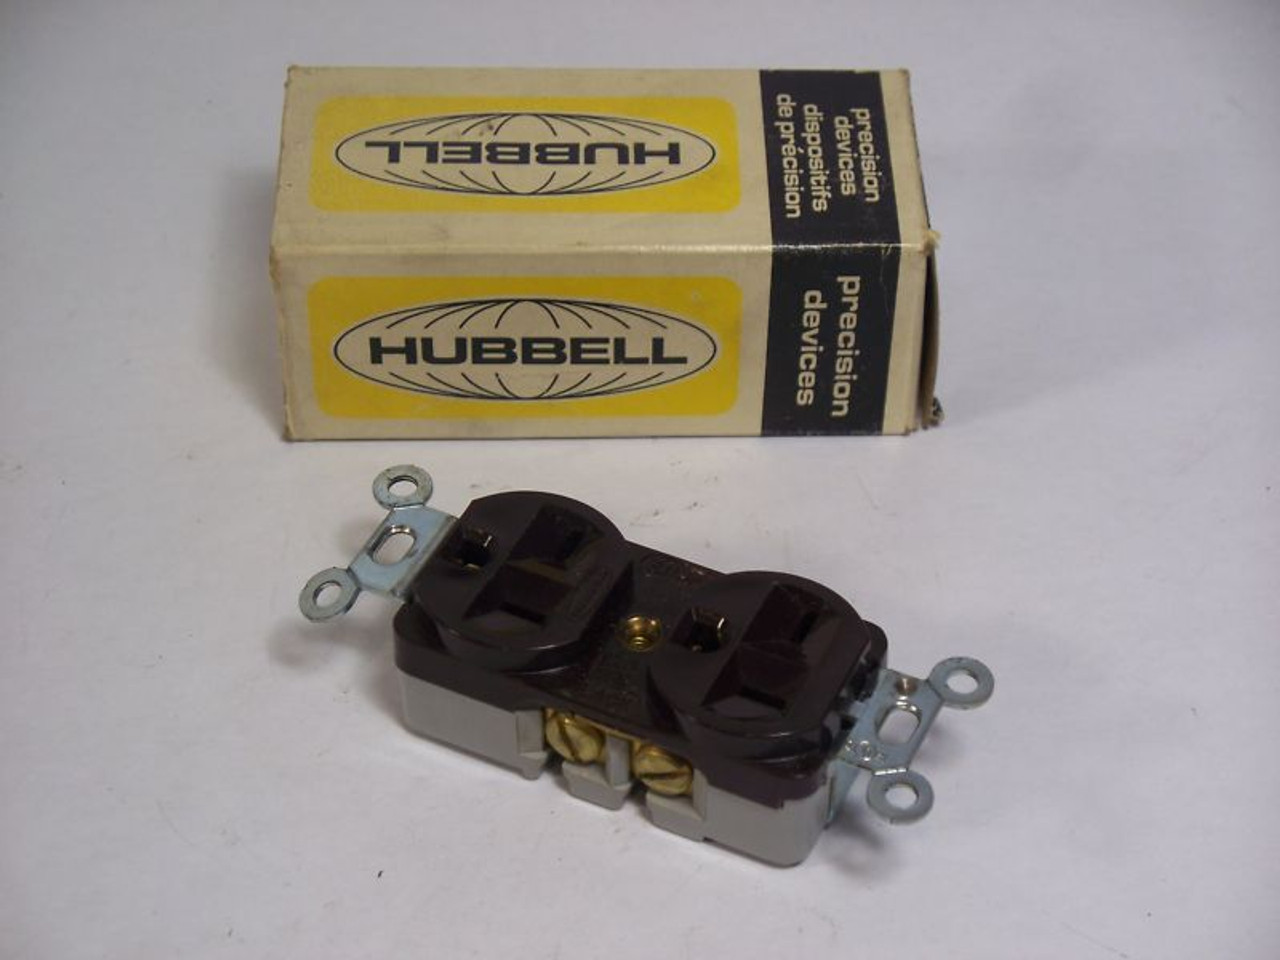 HUBBELL HBL5392 DUPLEX RECEPTACLE 20A 125V USED